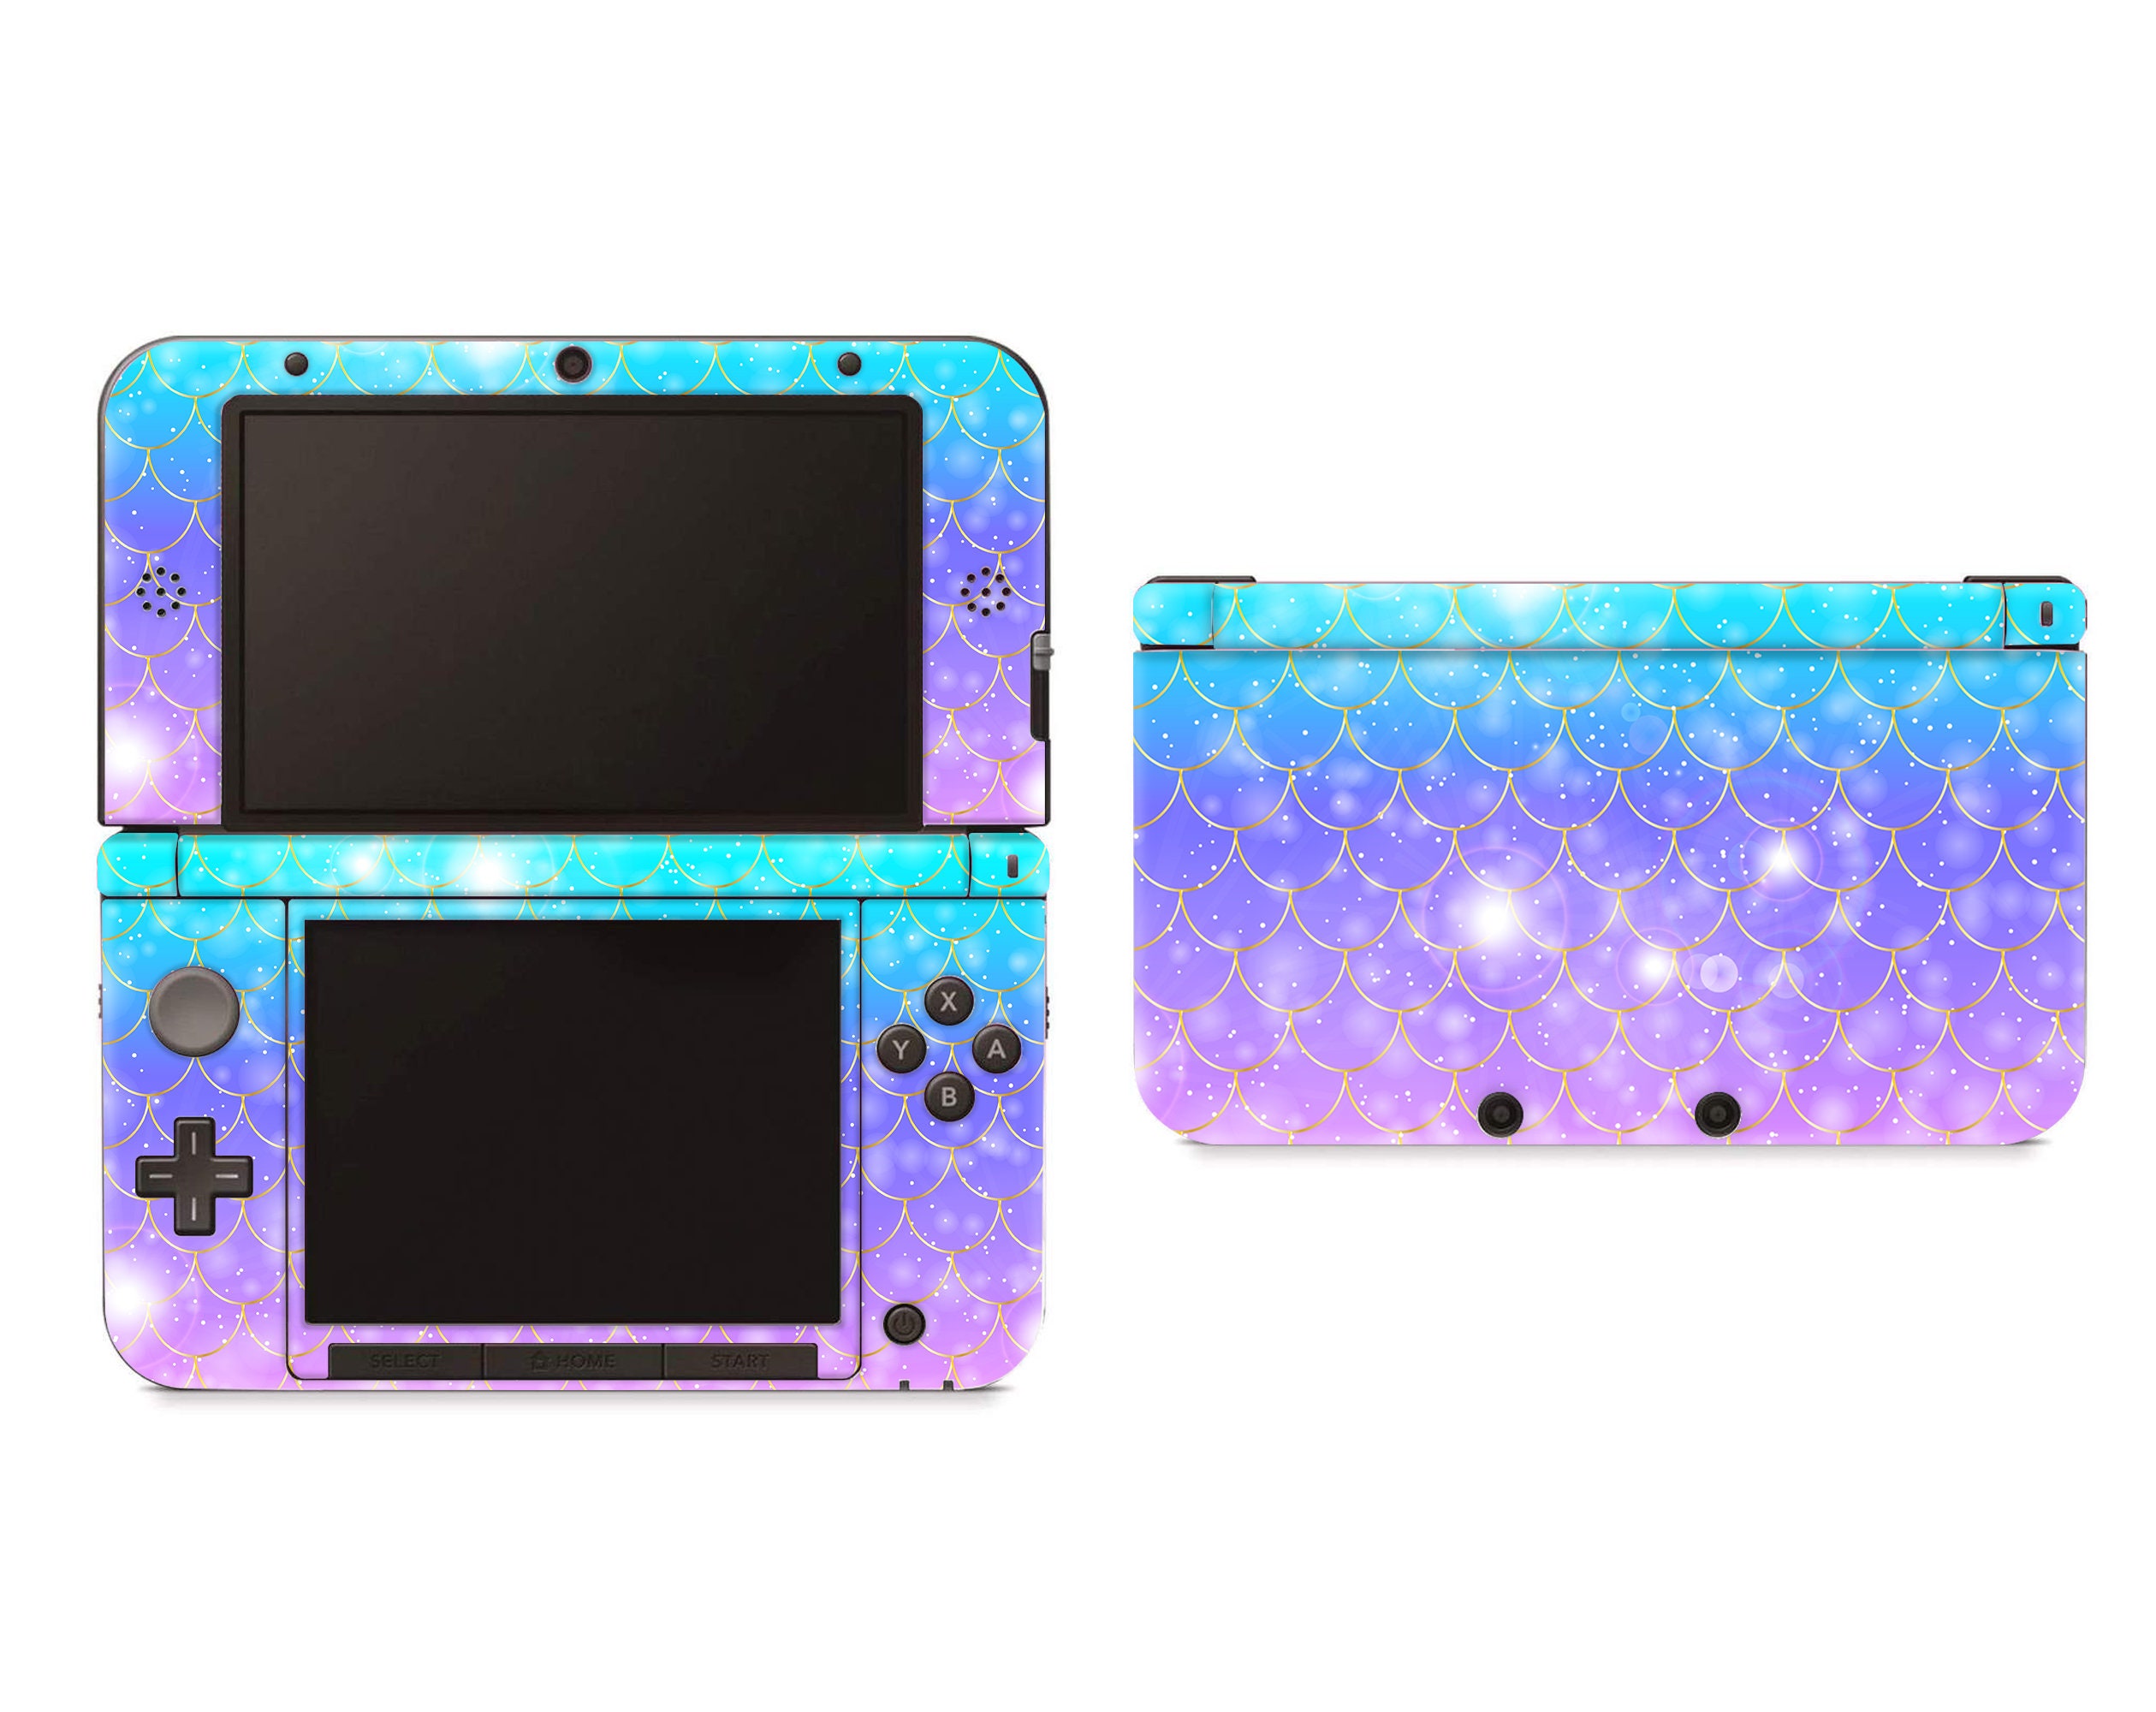 Scales Skin for 3DS Decal Blue Purple Skin Etsy